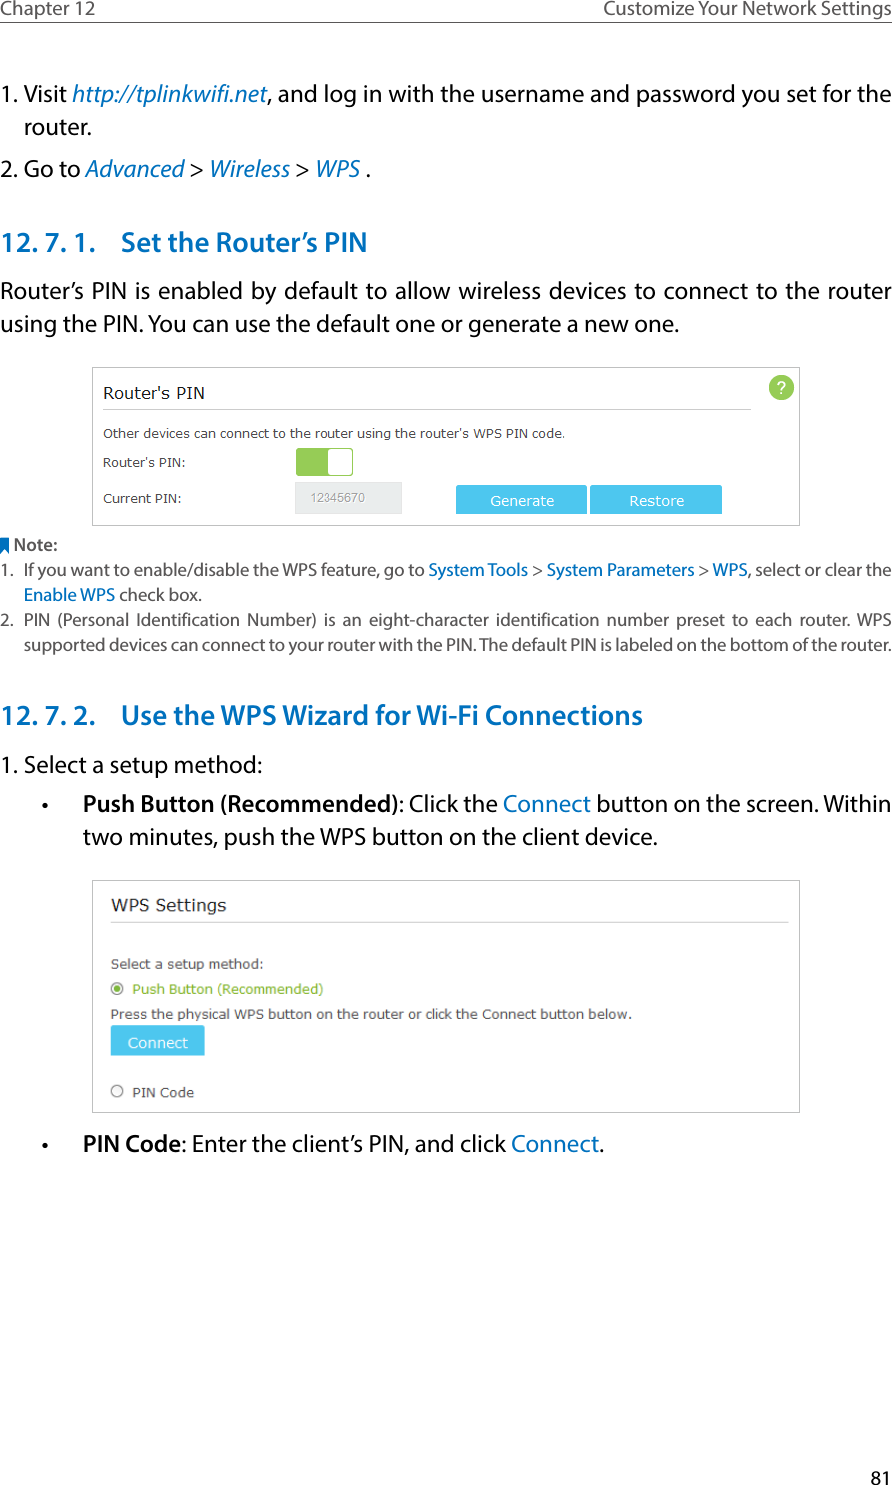 81Chapter 12 Customize Your Network Settings1. Visit http://tplinkwifi.net, and log in with the username and password you set for the router.2. Go to Advanced &gt; Wireless &gt; WPS .12. 7. 1.  Set the Router’s PINRouter’s PIN is enabled by default to allow wireless devices to connect to the router using the PIN. You can use the default one or generate a new one.Note:1.  If you want to enable/disable the WPS feature, go to System Tools &gt; System Parameters &gt; WPS, select or clear the Enable WPS check box.2.  PIN (Personal Identification Number) is an eight-character identification number preset to each router. WPS supported devices can connect to your router with the PIN. The default PIN is labeled on the bottom of the router.12. 7. 2.  Use the WPS Wizard for Wi-Fi Connections1. Select a setup method: •  Push Button (Recommended): Click the Connect button on the screen. Within two minutes, push the WPS button on the client device.•  PIN Code: Enter the client’s PIN, and click Connect.